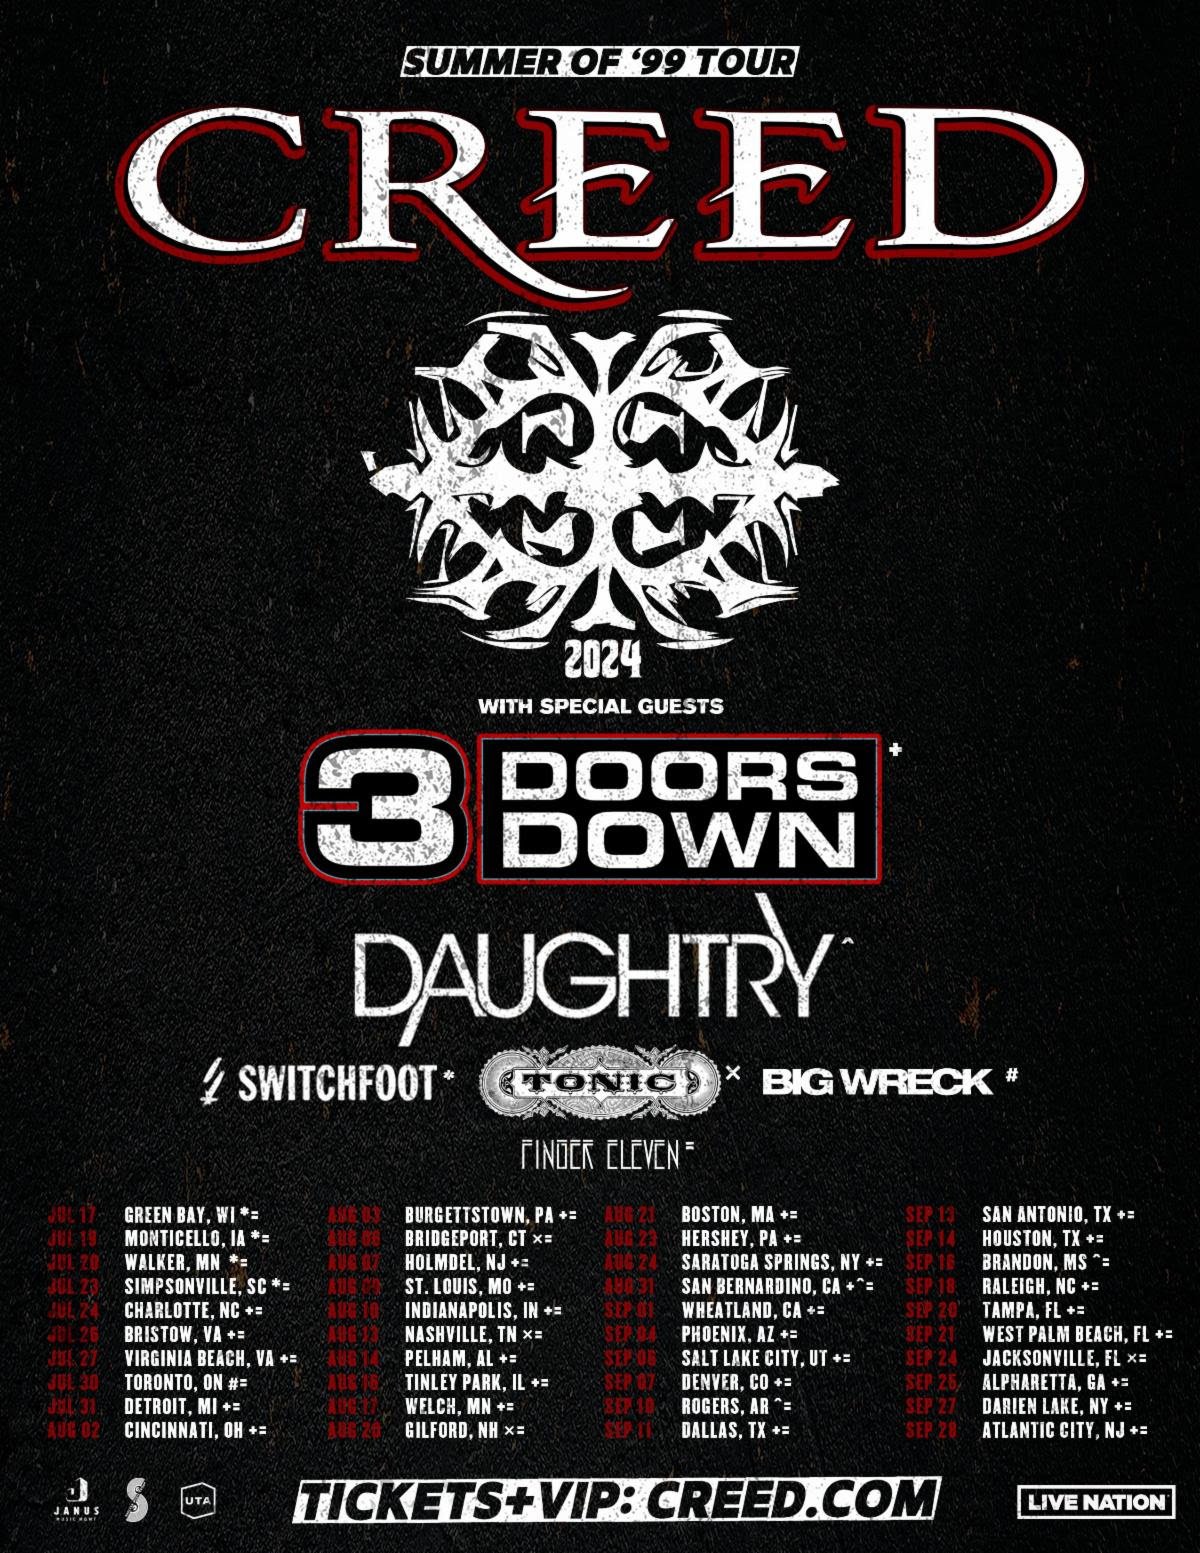 CREED Announces 2024 ‘SUMMER OF ‘99’ Tour The DreadMusicReview